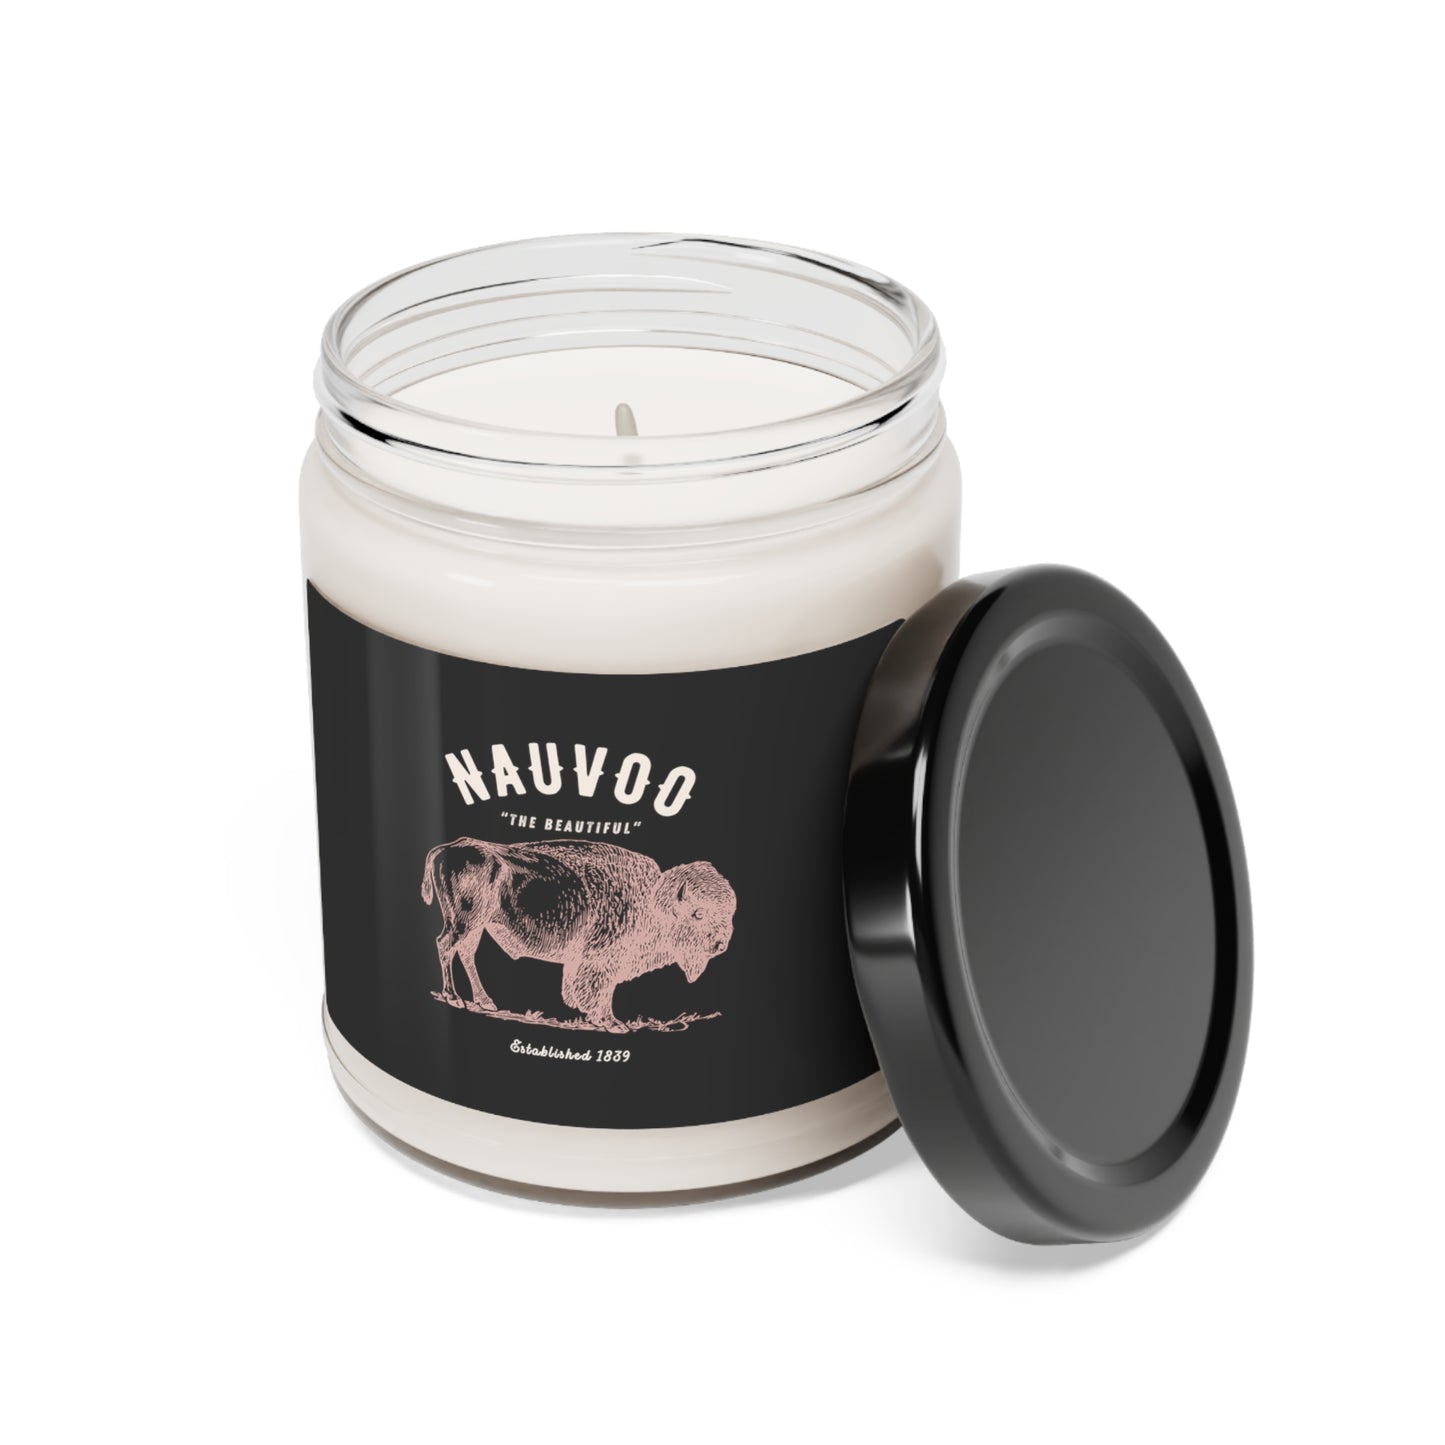 Nauvoo "The Beautiful" Illinois, Scented Candle